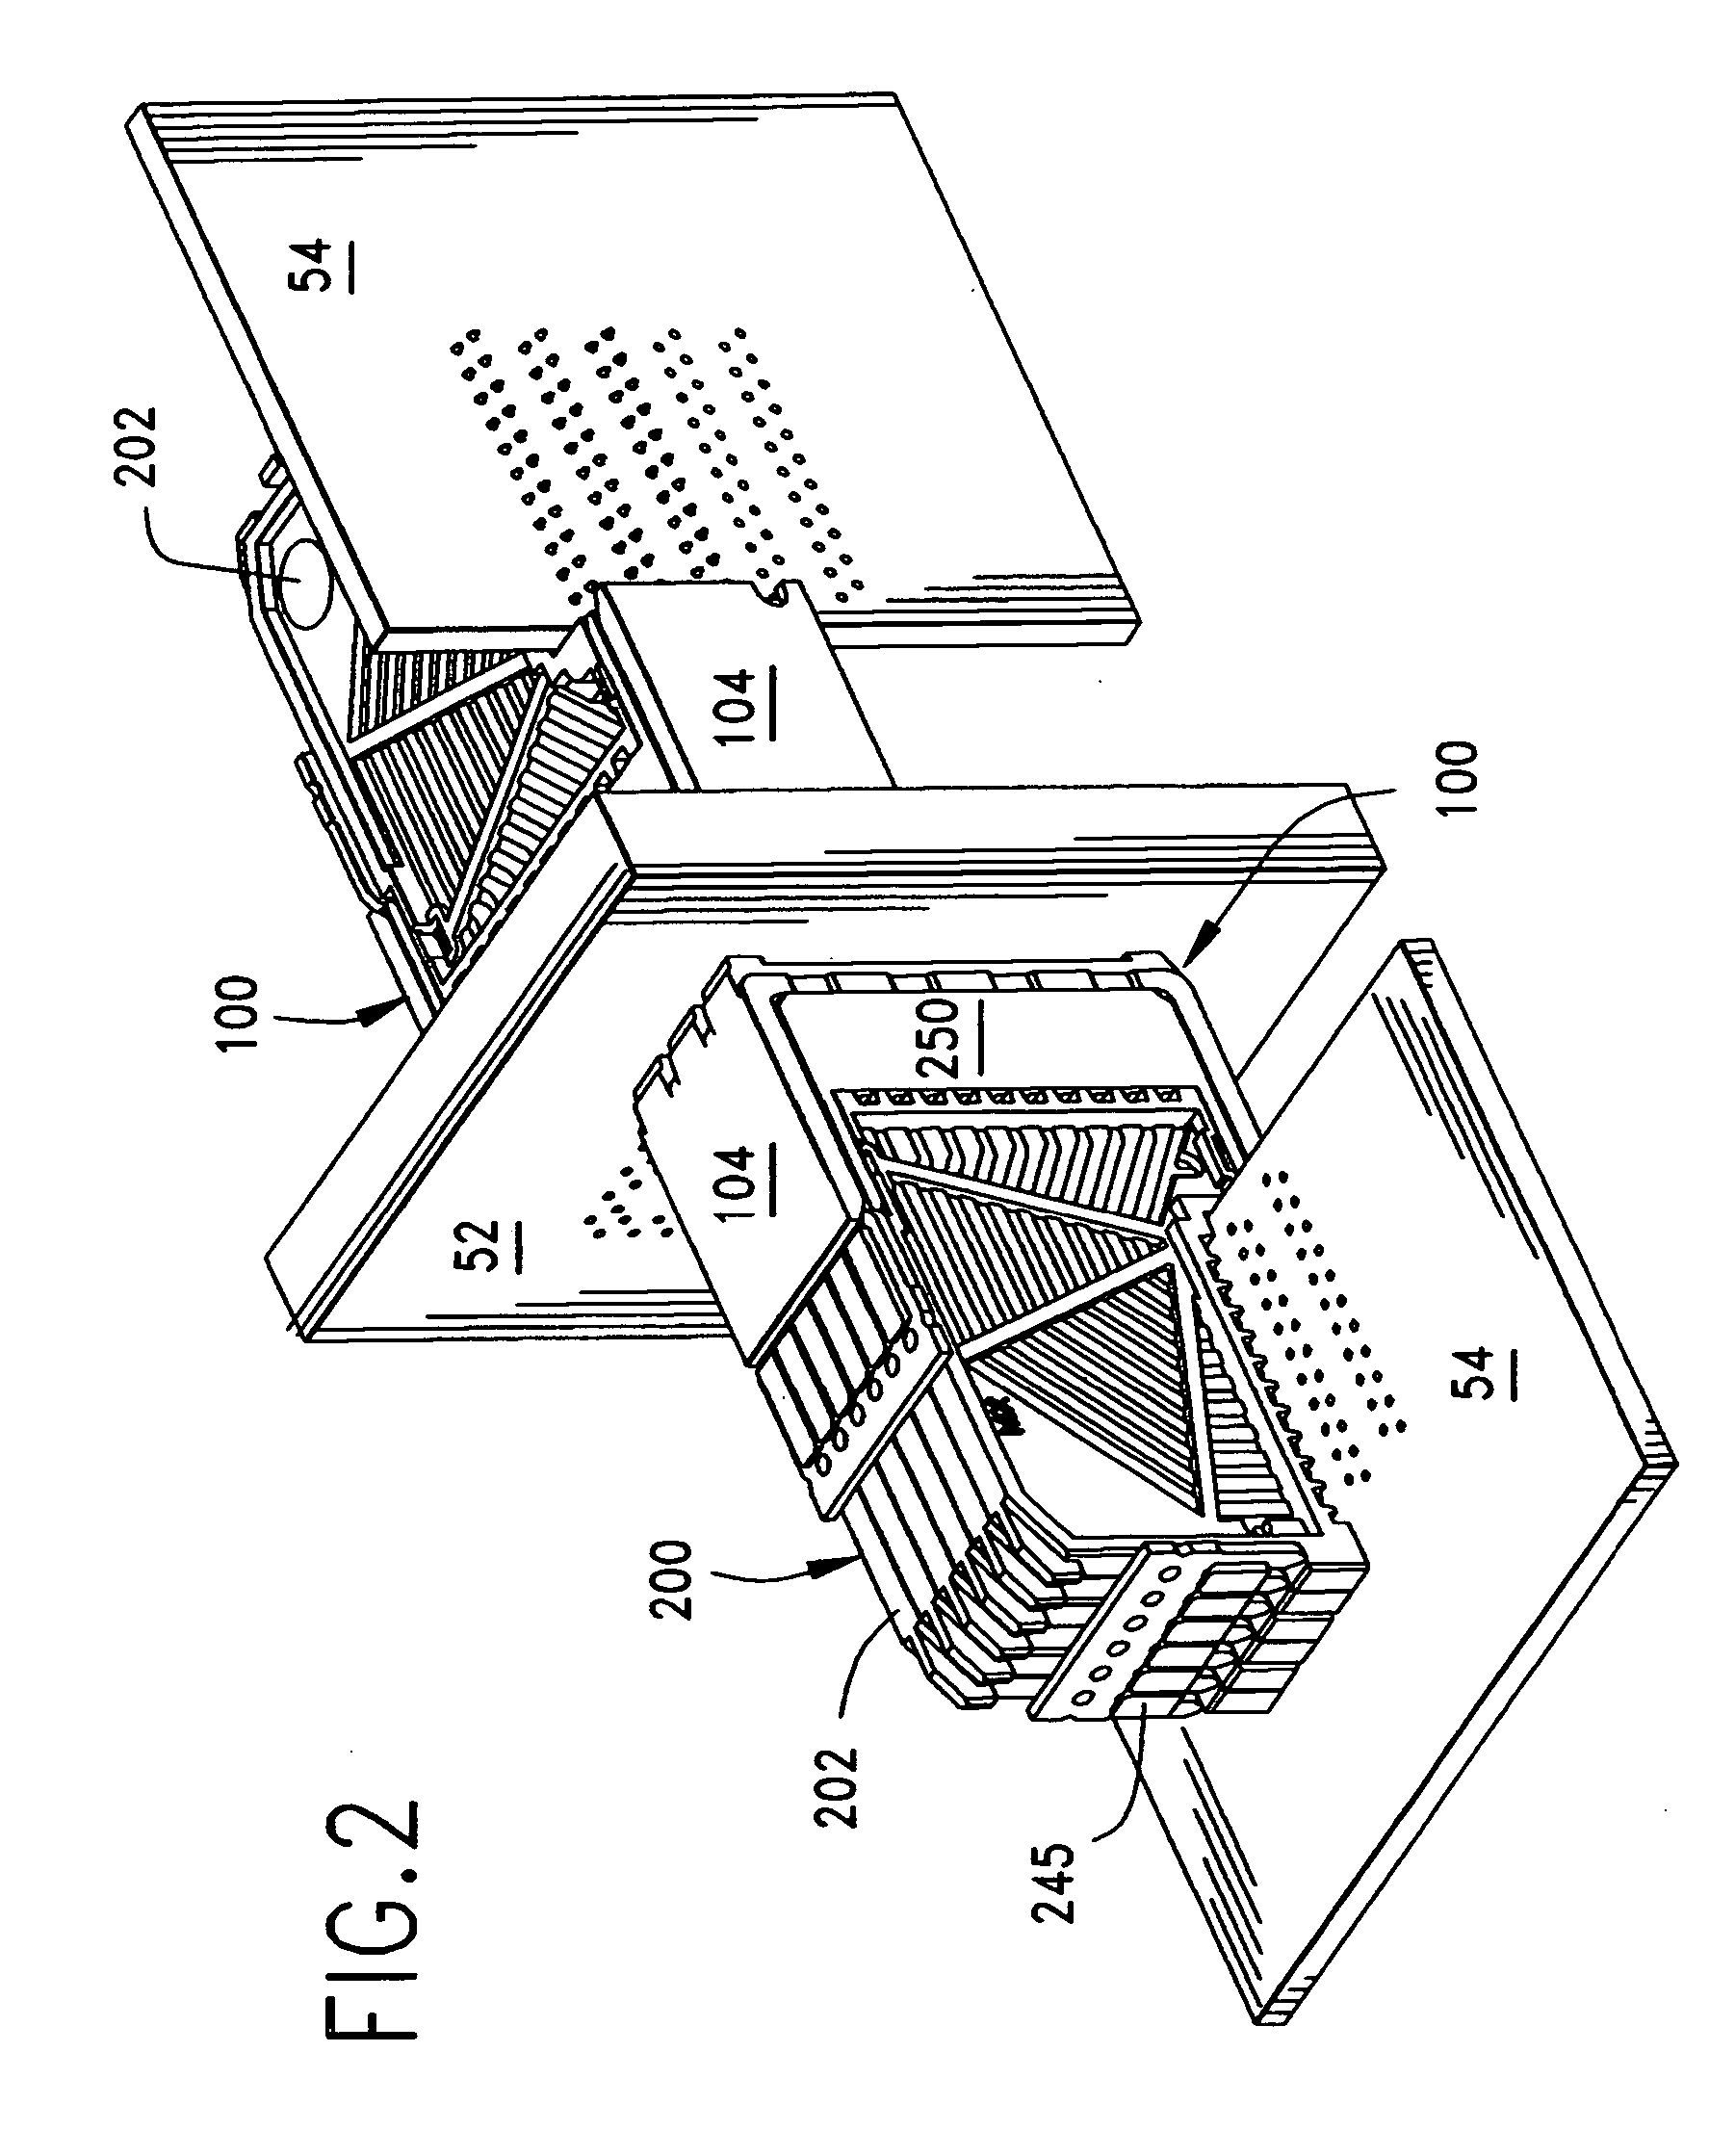 High-density, robust connector with dielectric insert